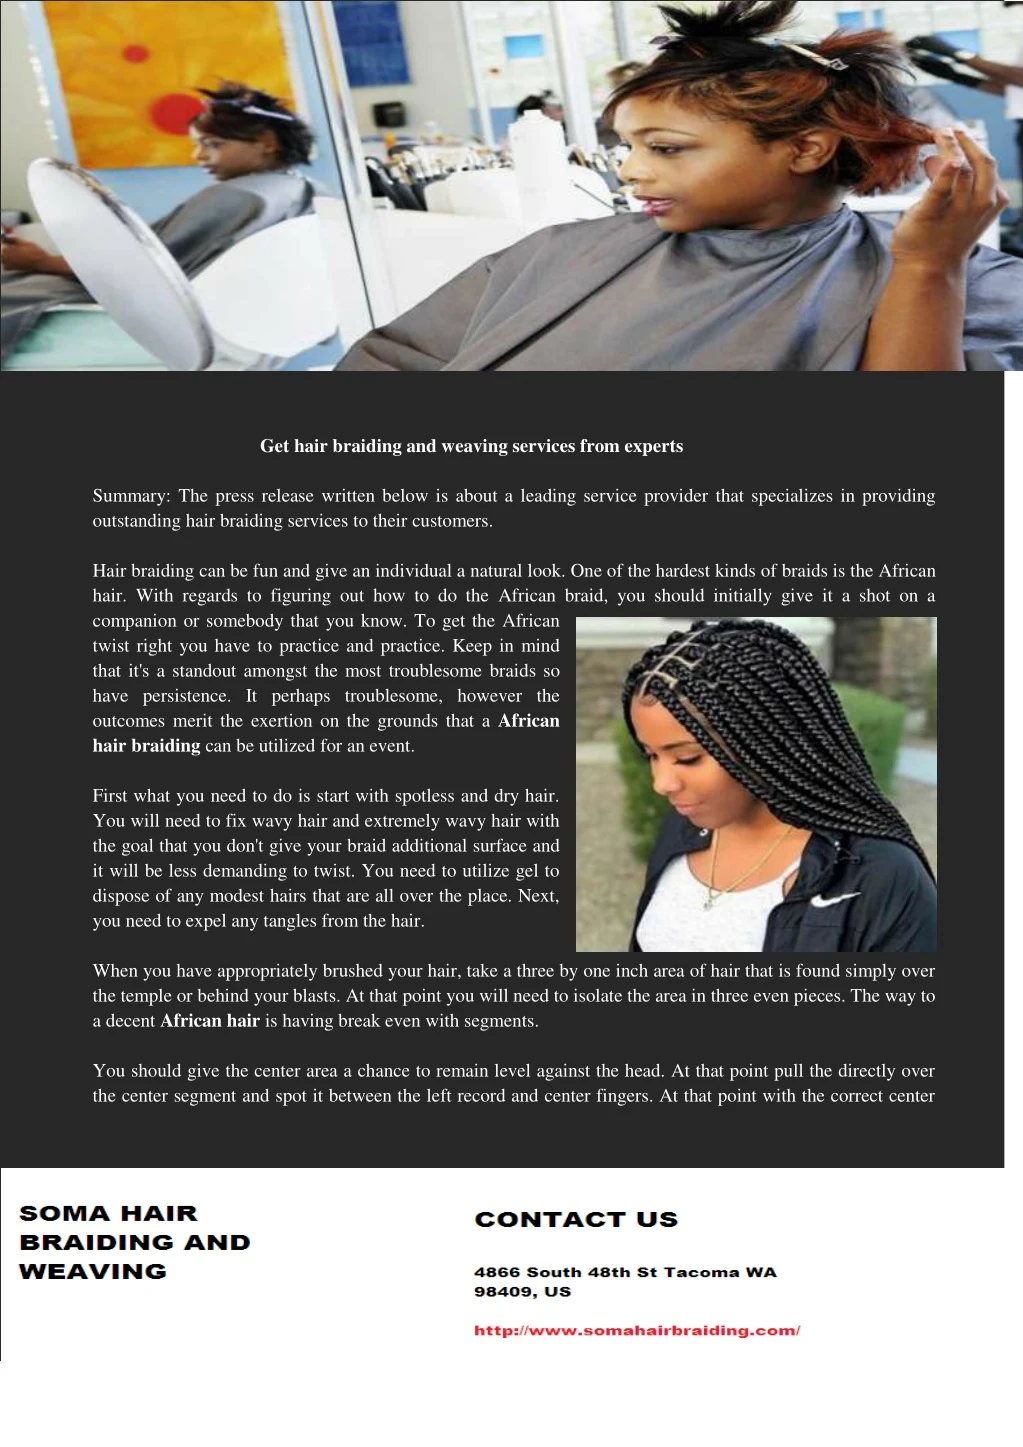 get hair braiding and weaving services from